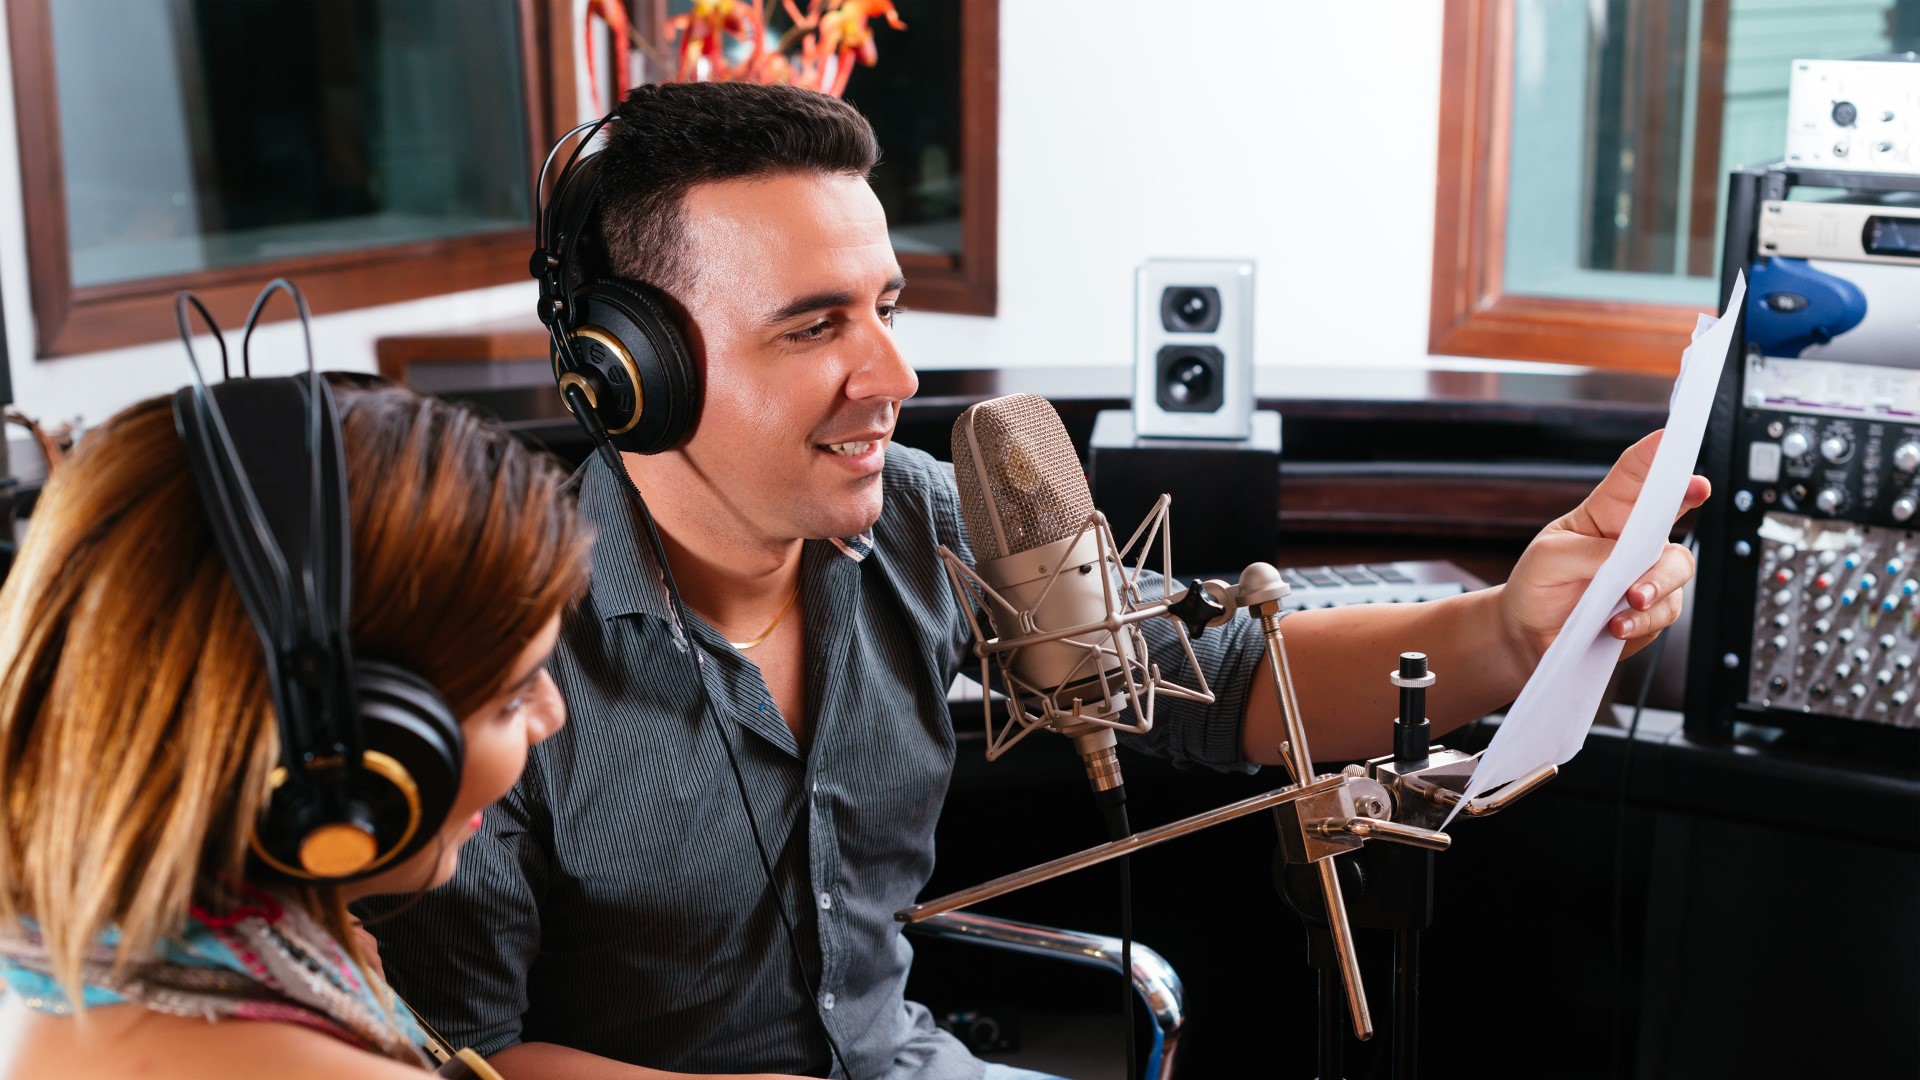 Man and woman are in a recording booth, and the man is reading or singing into a microphone from a paper in front of him. The woman is joining along, or possibly just wondering what the man is doing.